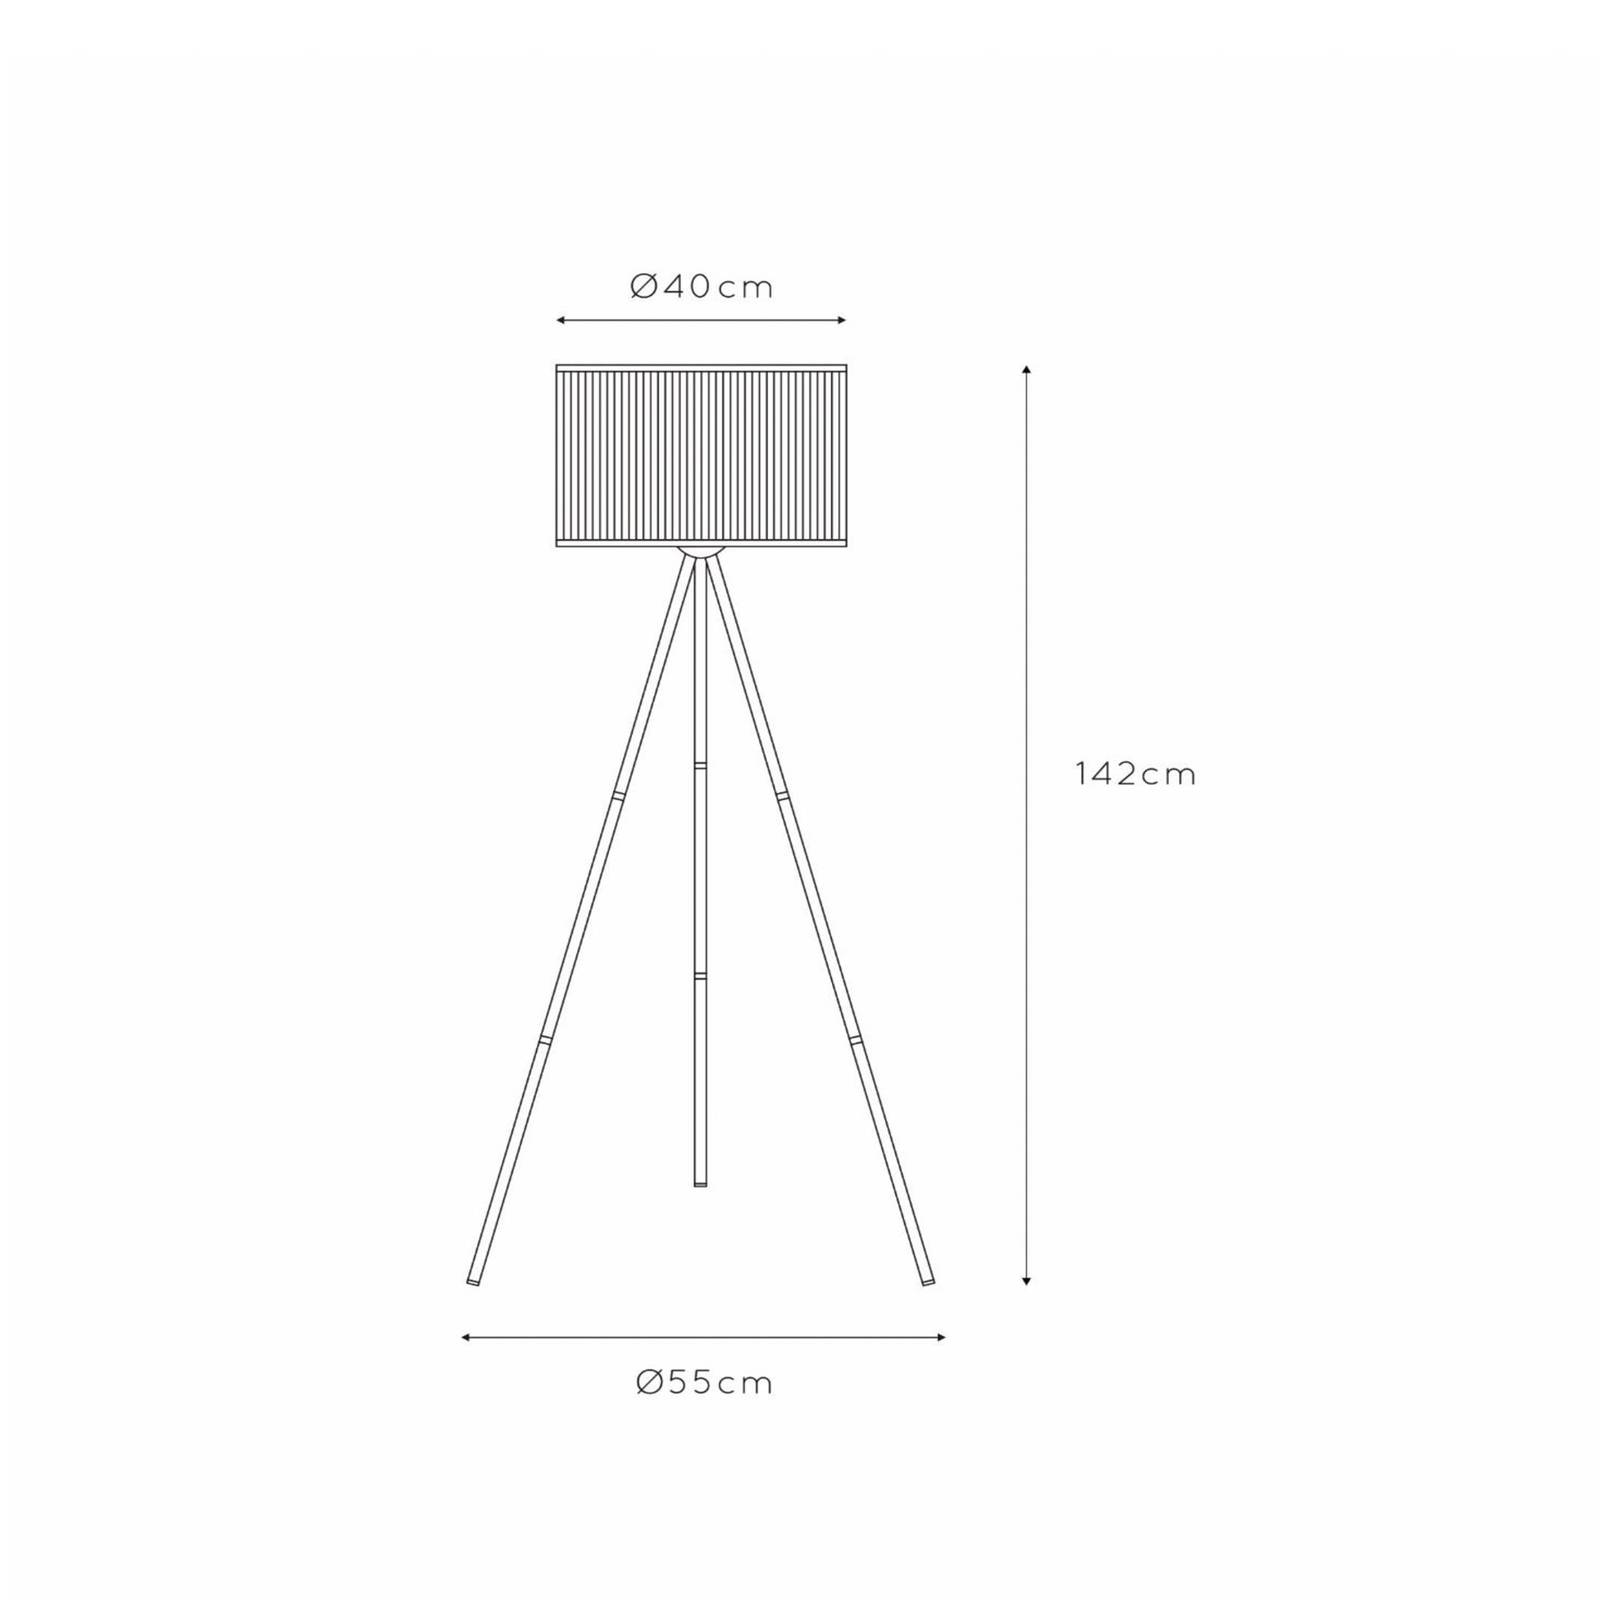 Lucide Tagalog floor lamp made of bamboo, black, tripod